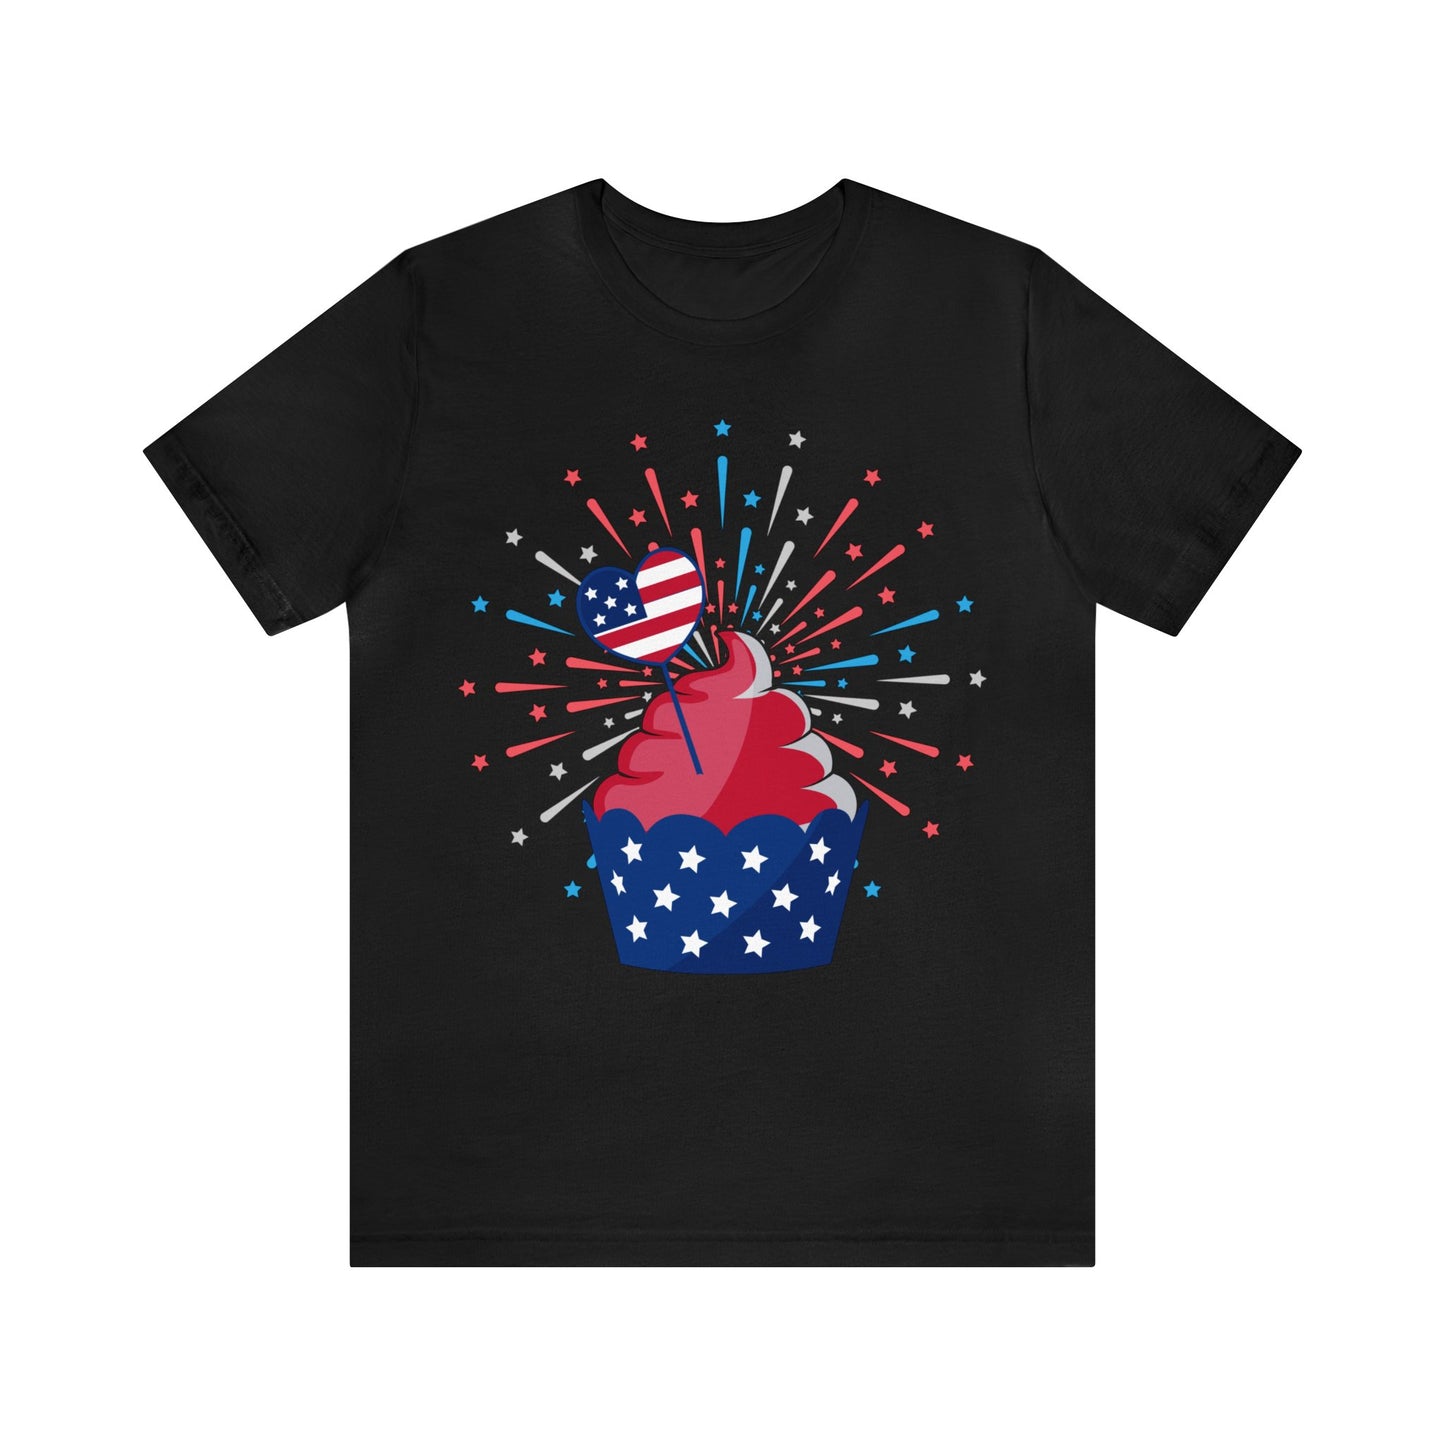 American Flag T-shirt: Patriotic Apparel for All Occasions